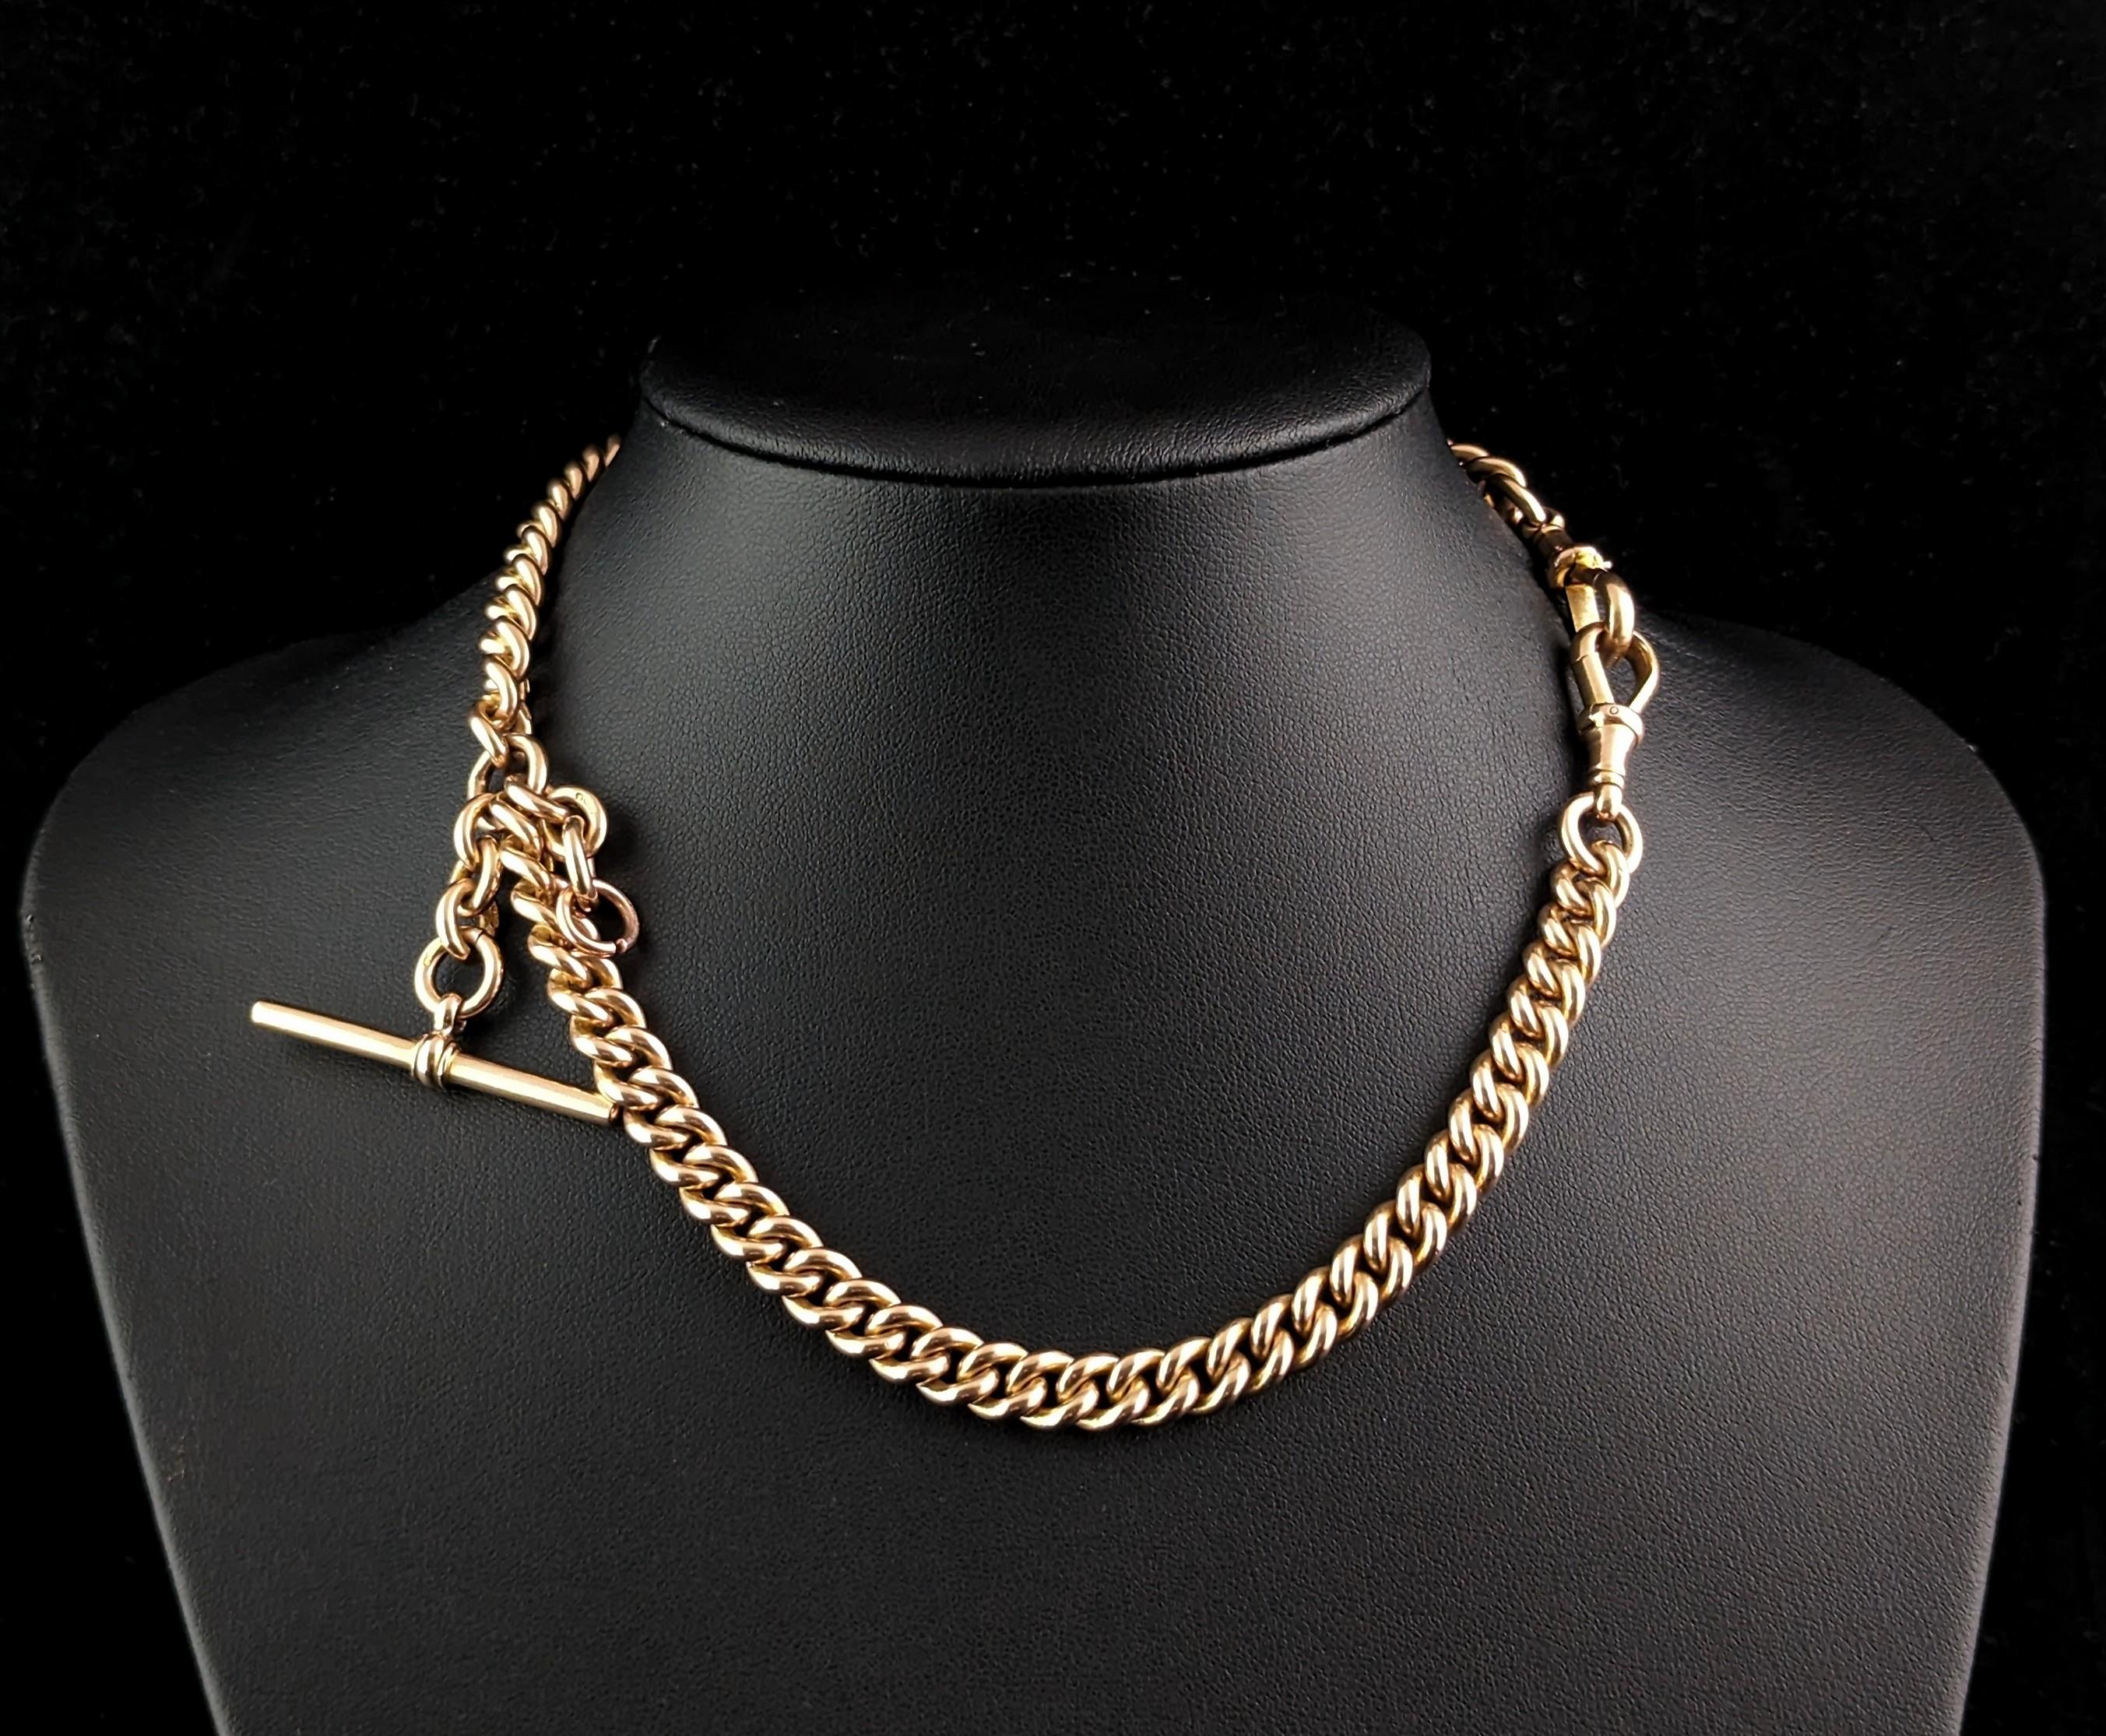 We adore a good antique gold Albert chain here and this one is really the pinnacle of chains! I am truly in love with this one!

It has everything you could ever wish for in an antique gold Albert chain, the heavy weight, fine craftsmanship and if